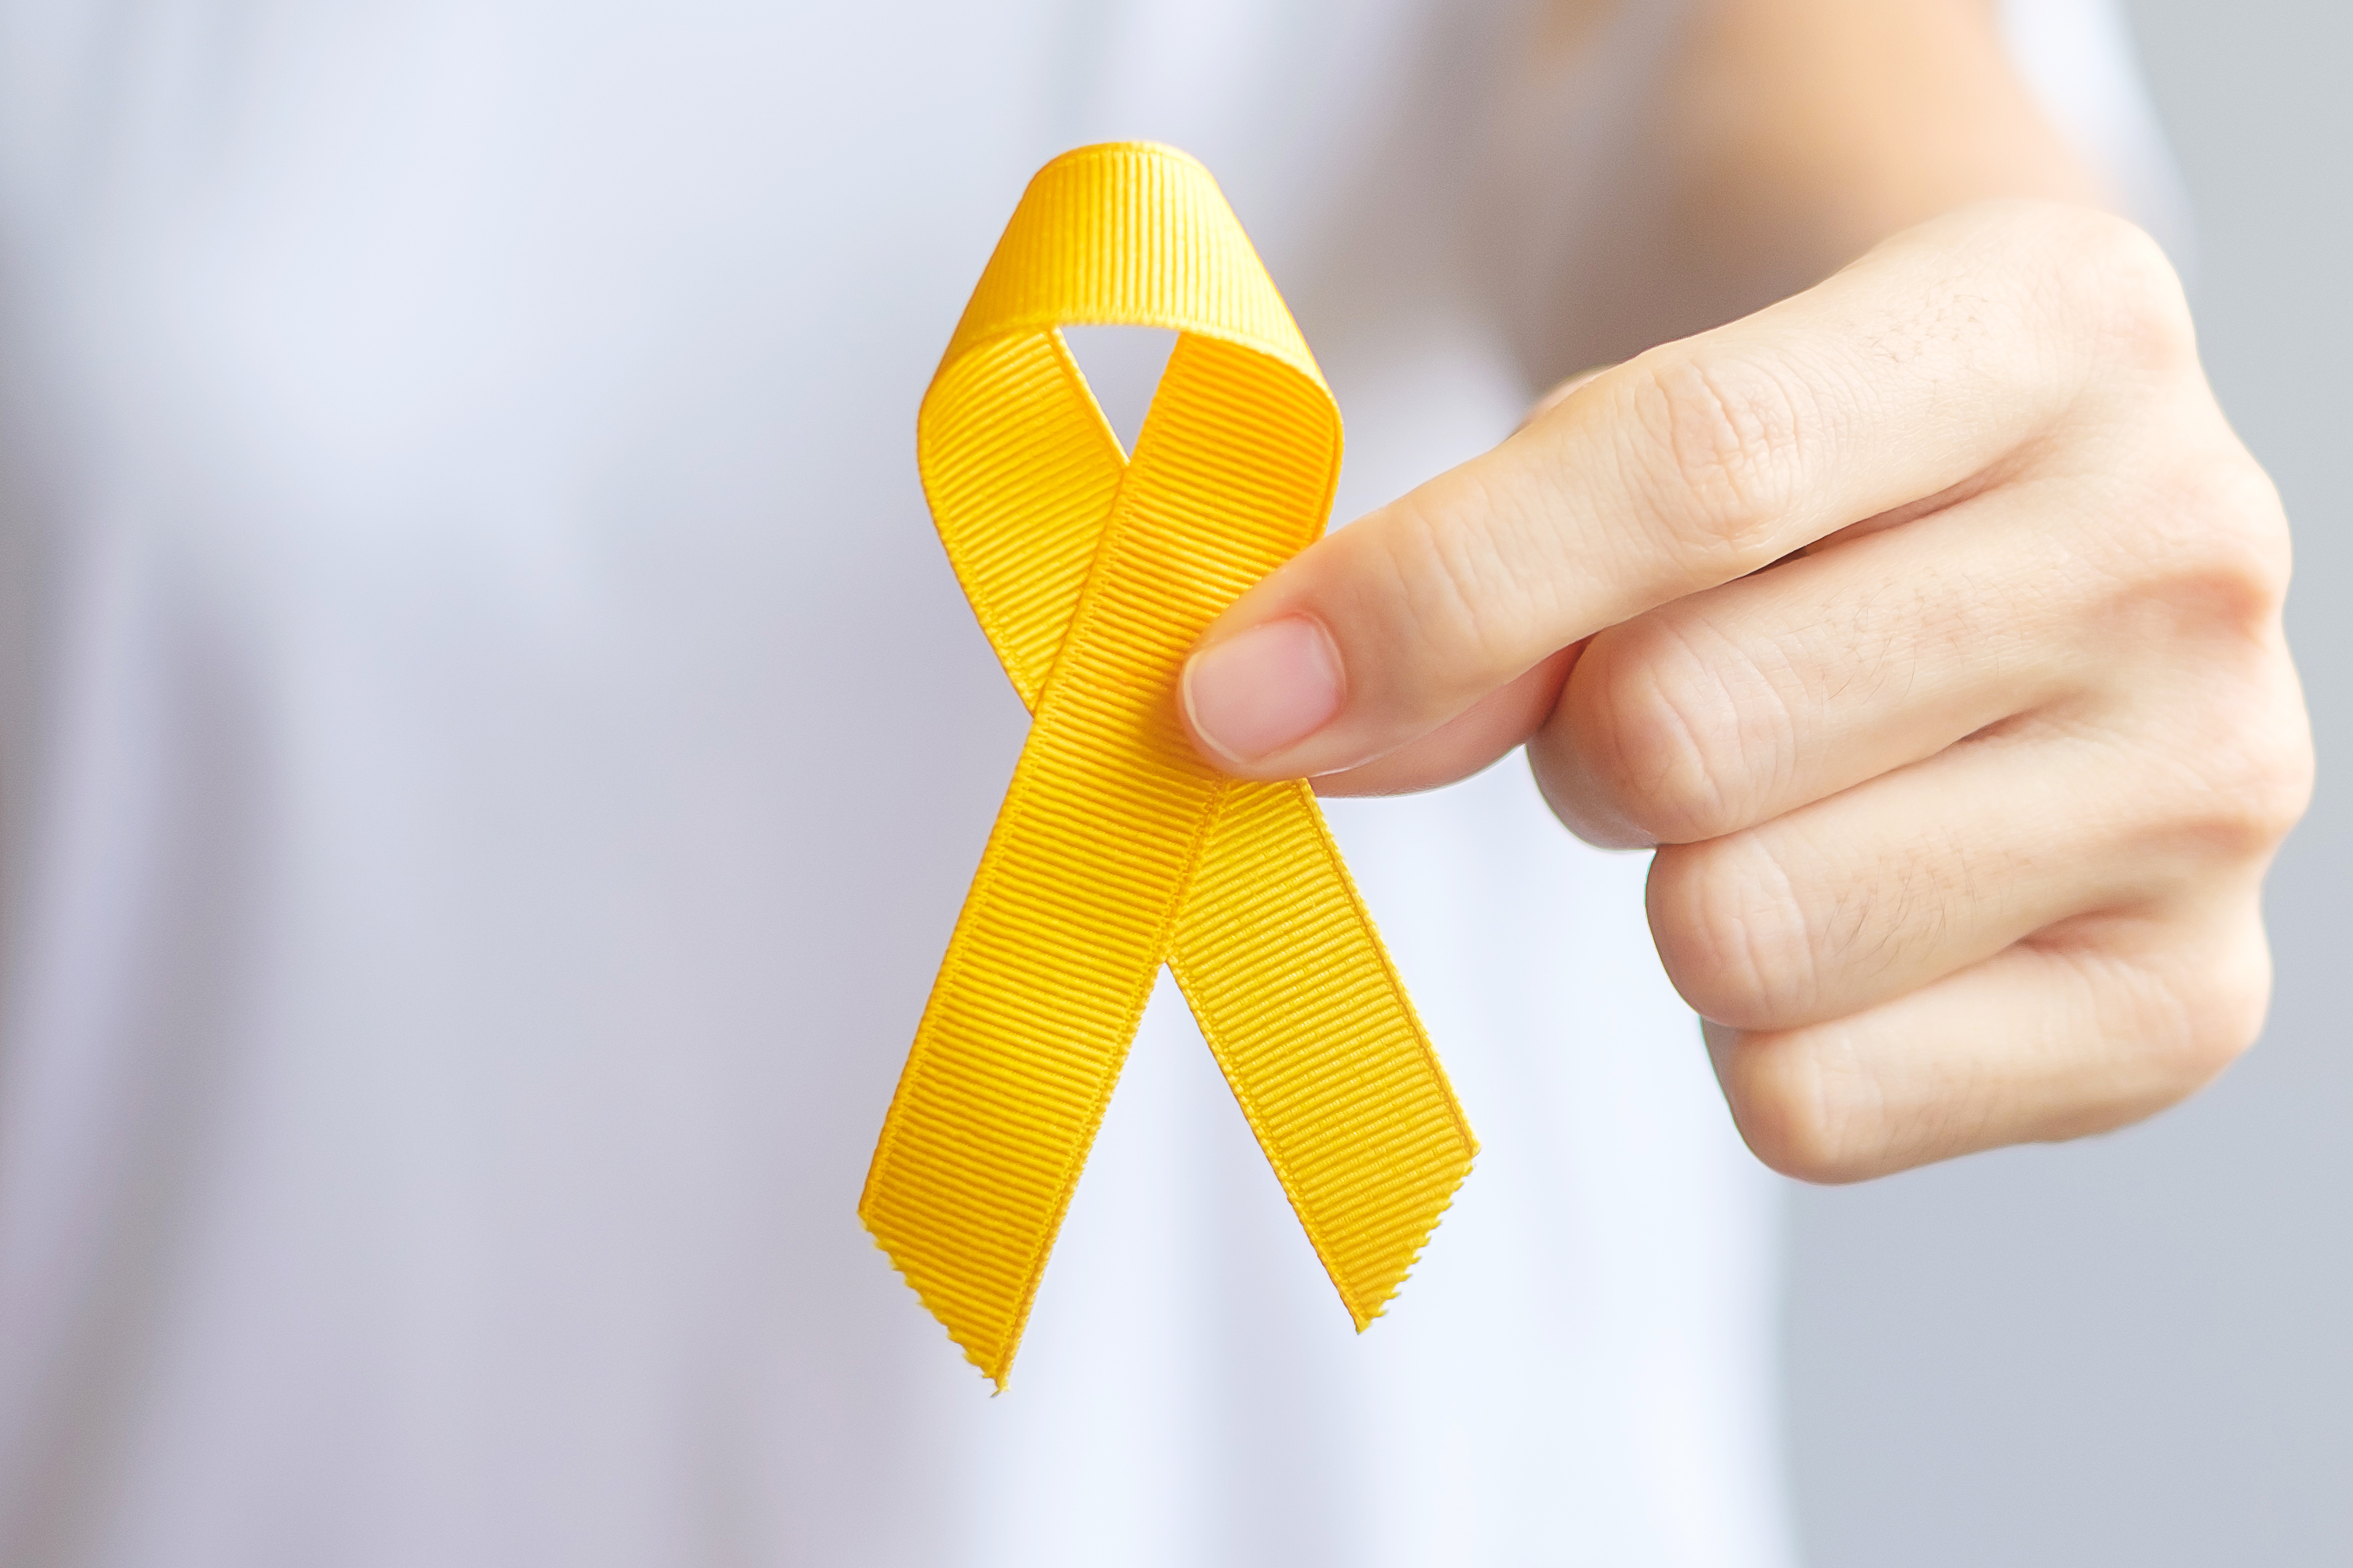 suicide prevention day sarcoma bone bladder and childhood cancer awareness month yellow ribbon for supporting people living and illness children healthcare and world cancer day concept